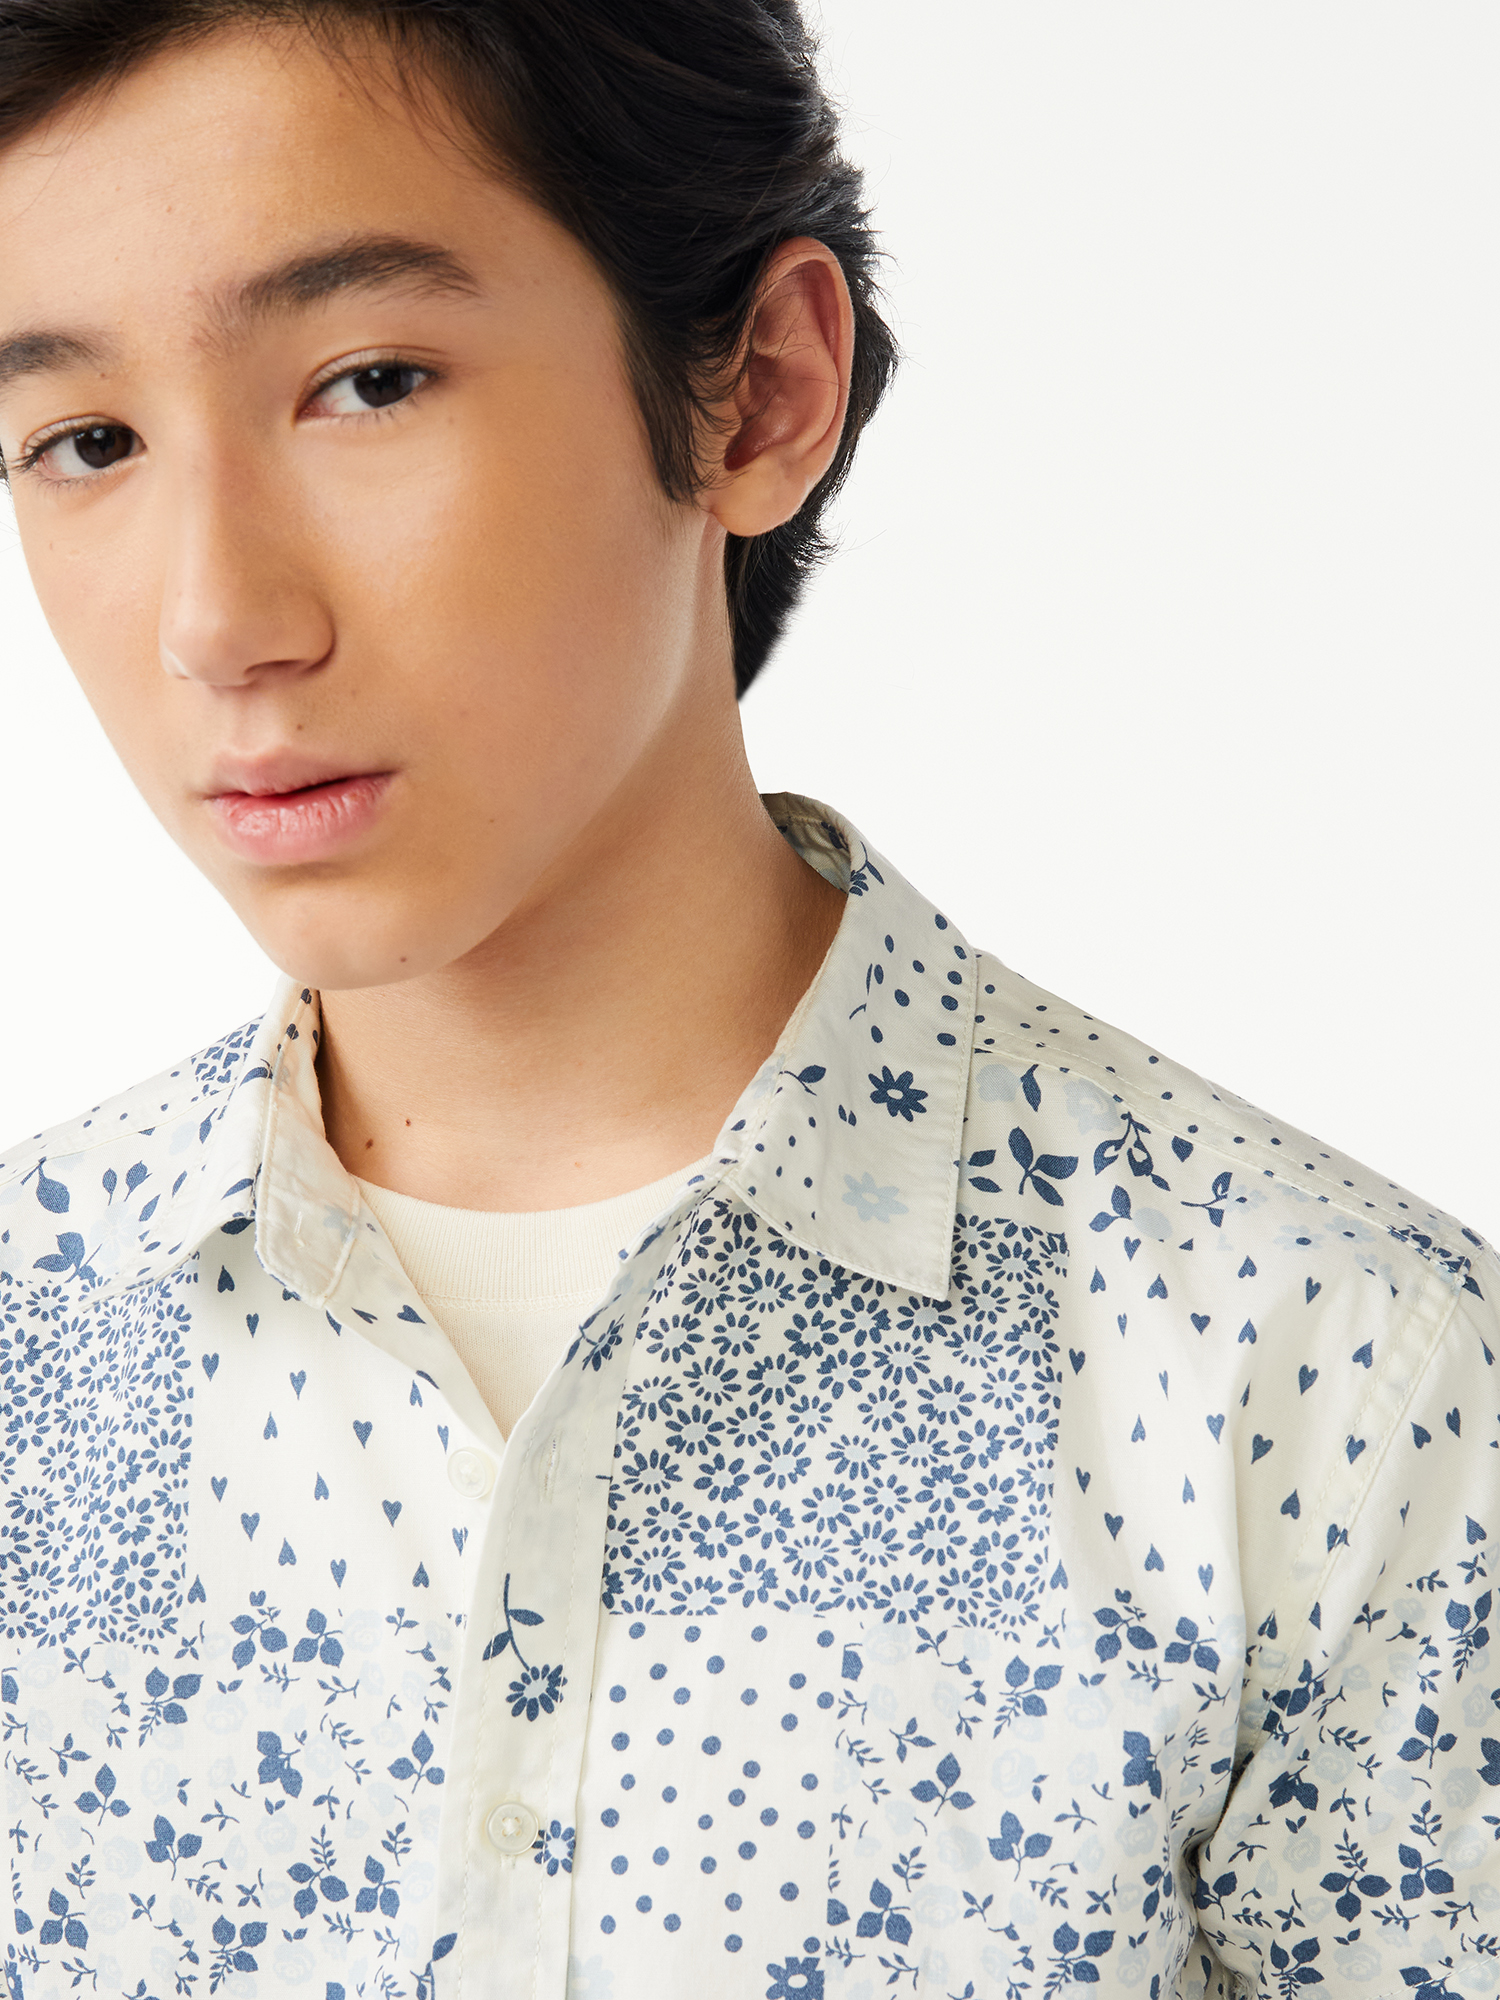 Free Assembly Boys Floral Print Button Down Shirt, Sizes 4-18 - image 4 of 5